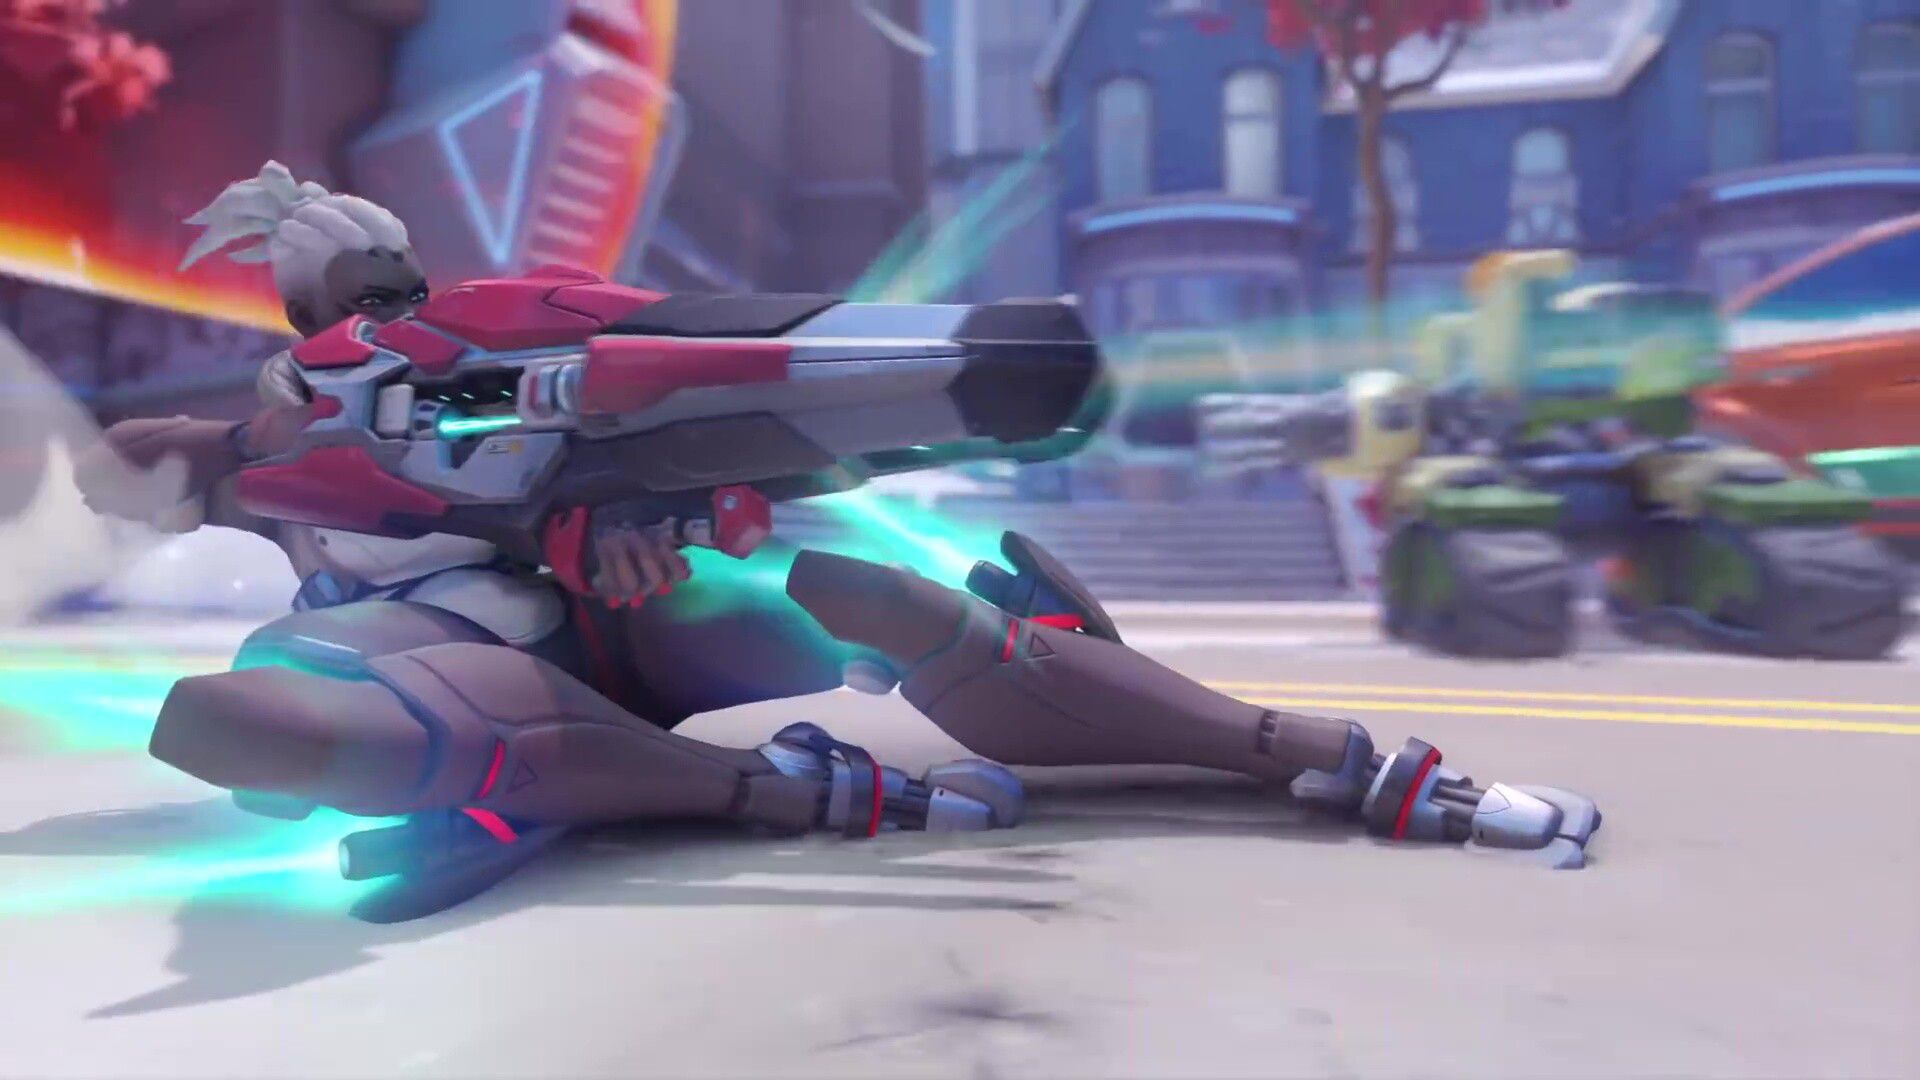 "Sojoan", a new character with a powerful rocket-equipped thigh with a whip whip of the Overwatch 2 machine 19